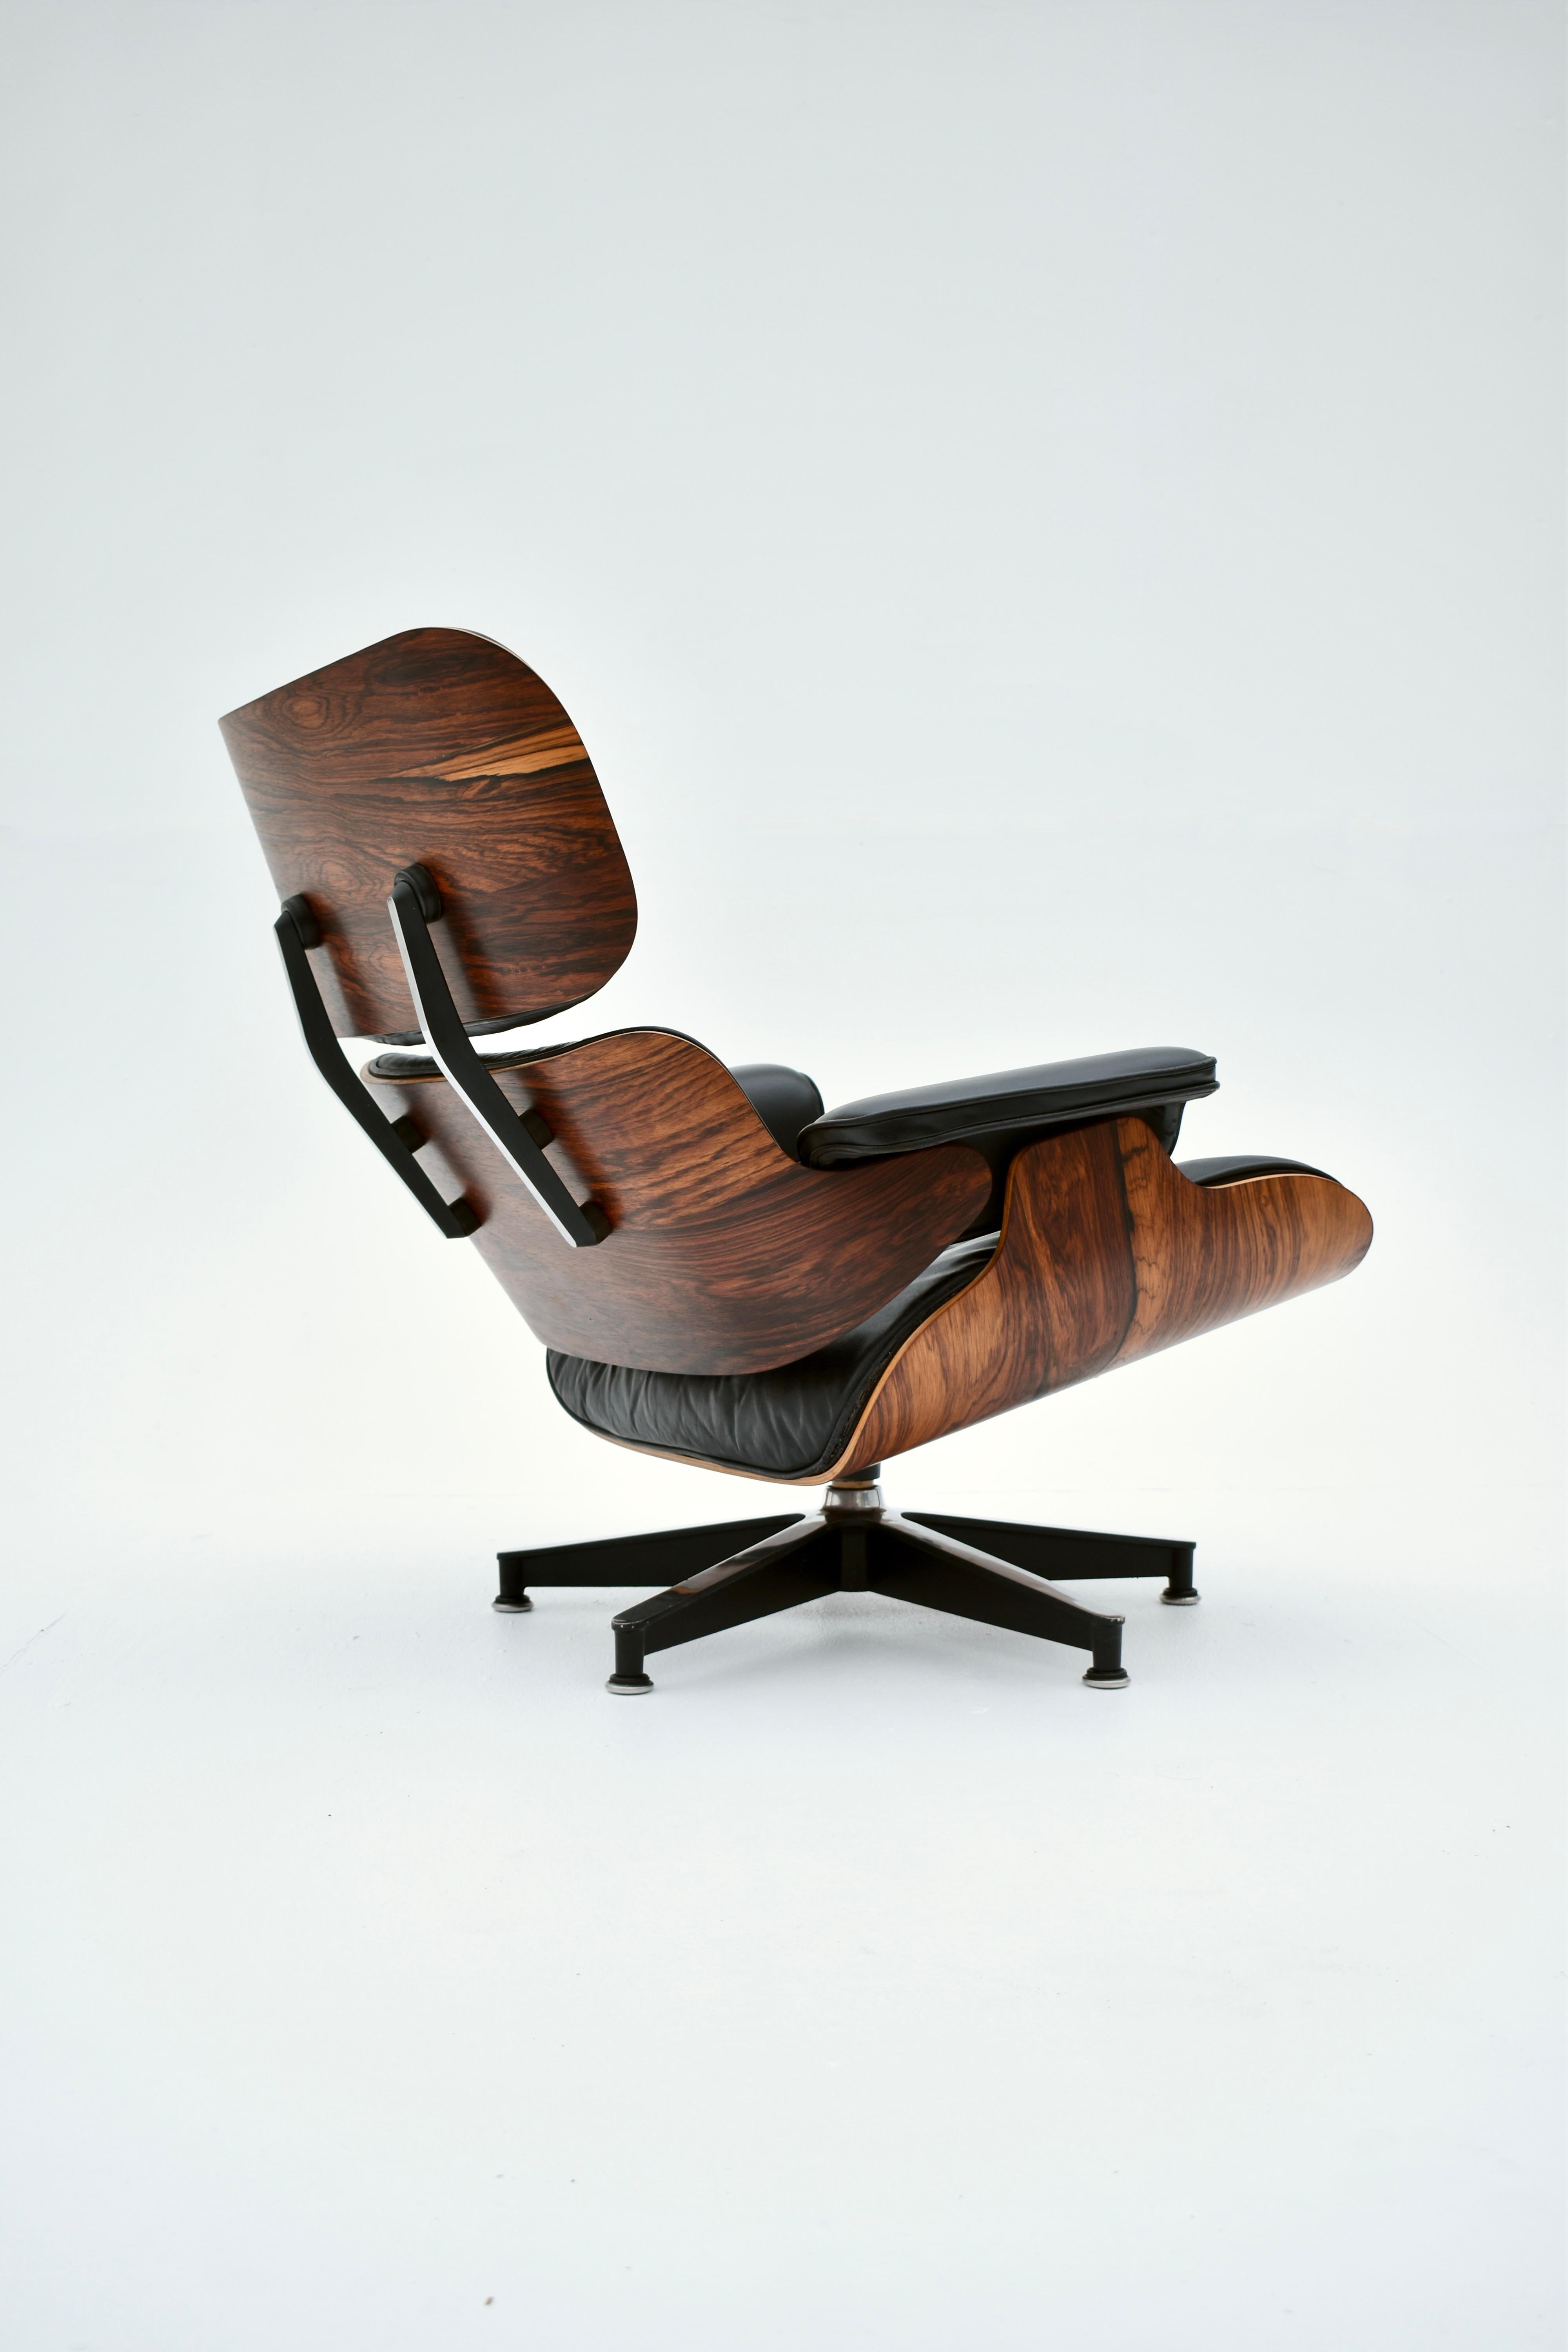 Rosewood Original 1960's Production Eames Lounge Chair For Herman Miller